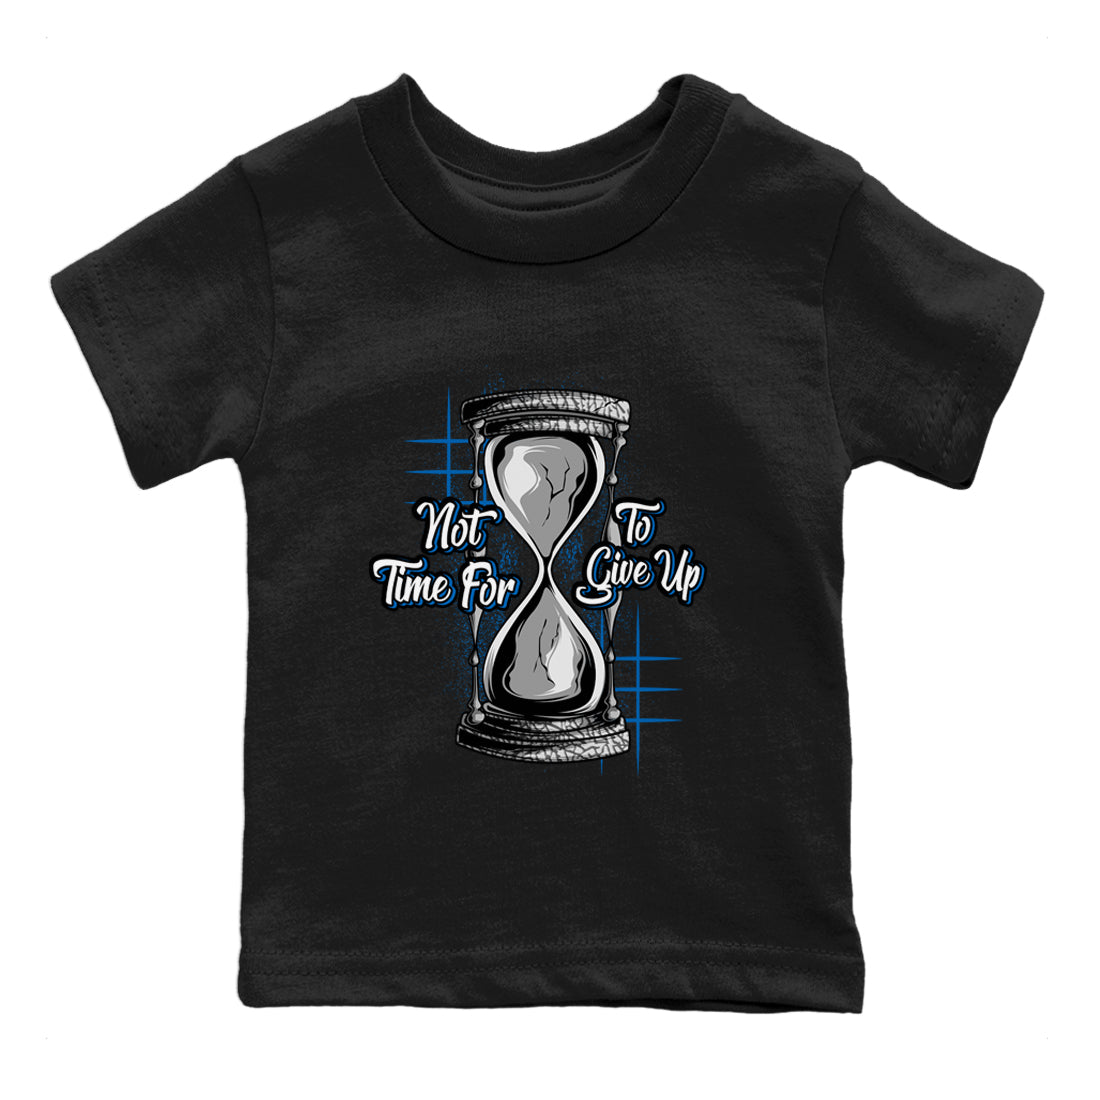 Air Jordan 3 Wizards Not Time For To Give Up Baby and Kids Sneaker Tees Air Jordan 3 Wizards Kids Sneaker Tees Washing and Care Tip